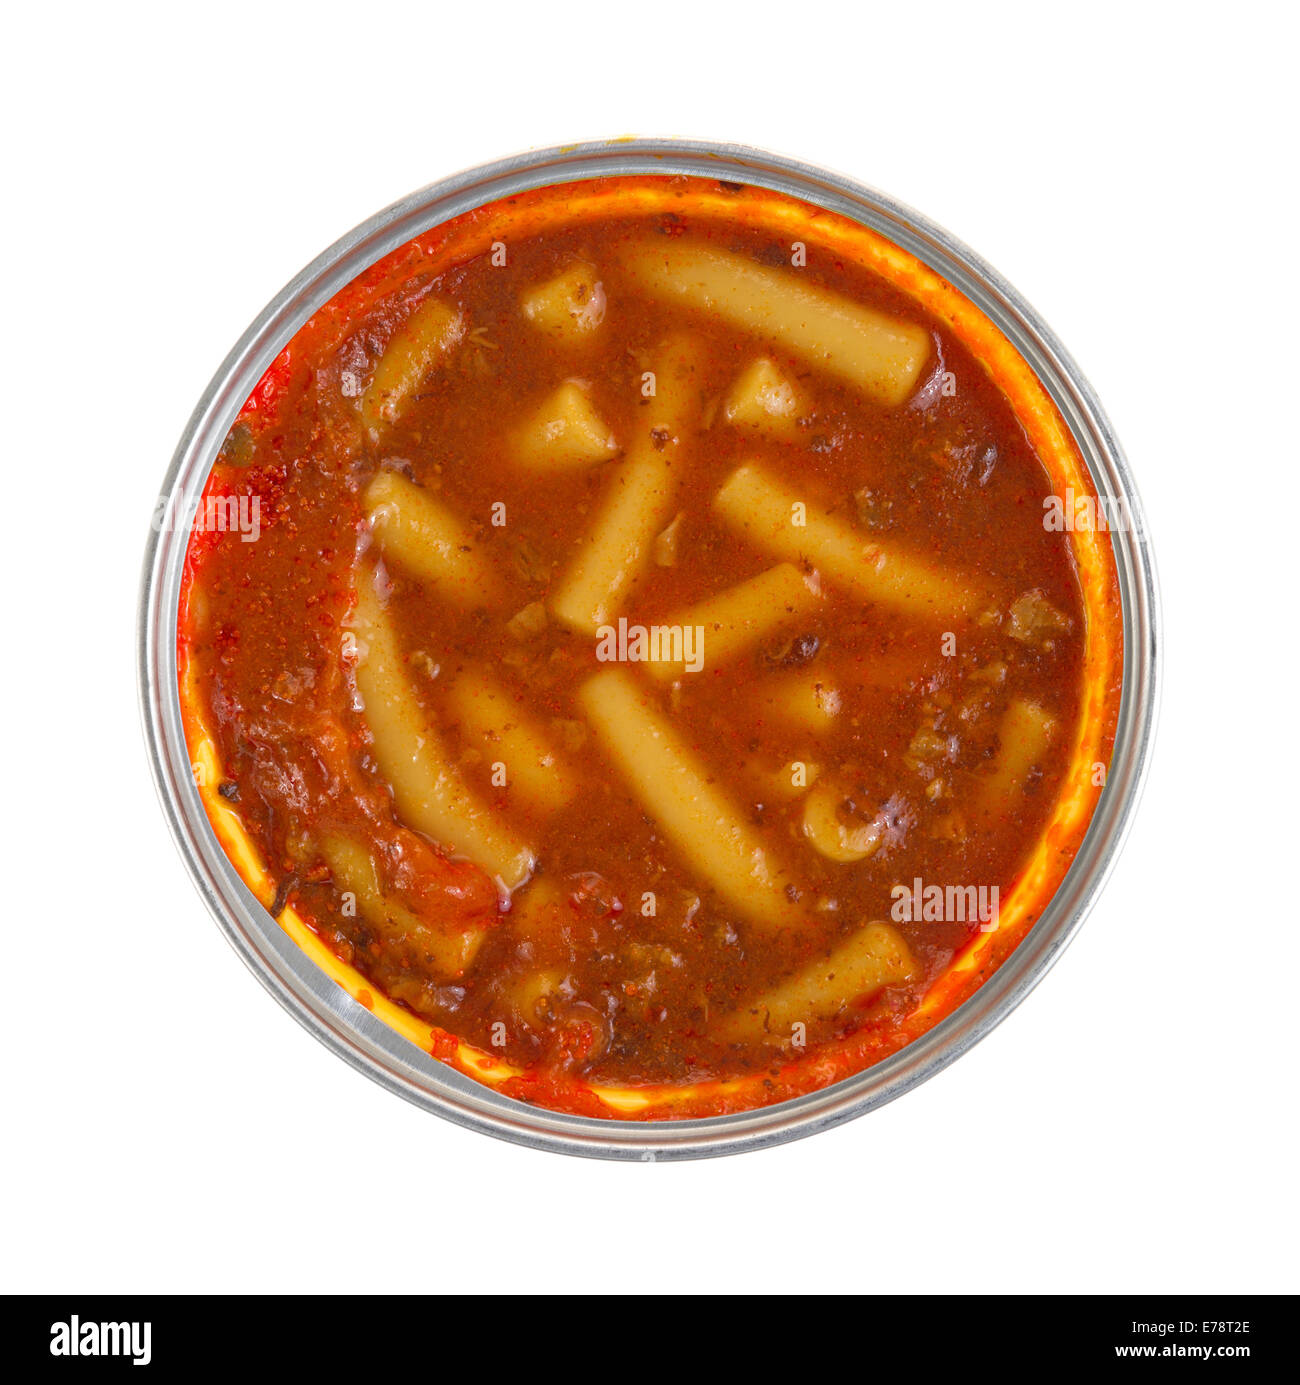 Top view of an opened can of pasta and beef chunks in a tomato sauce on a white background. Stock Photo